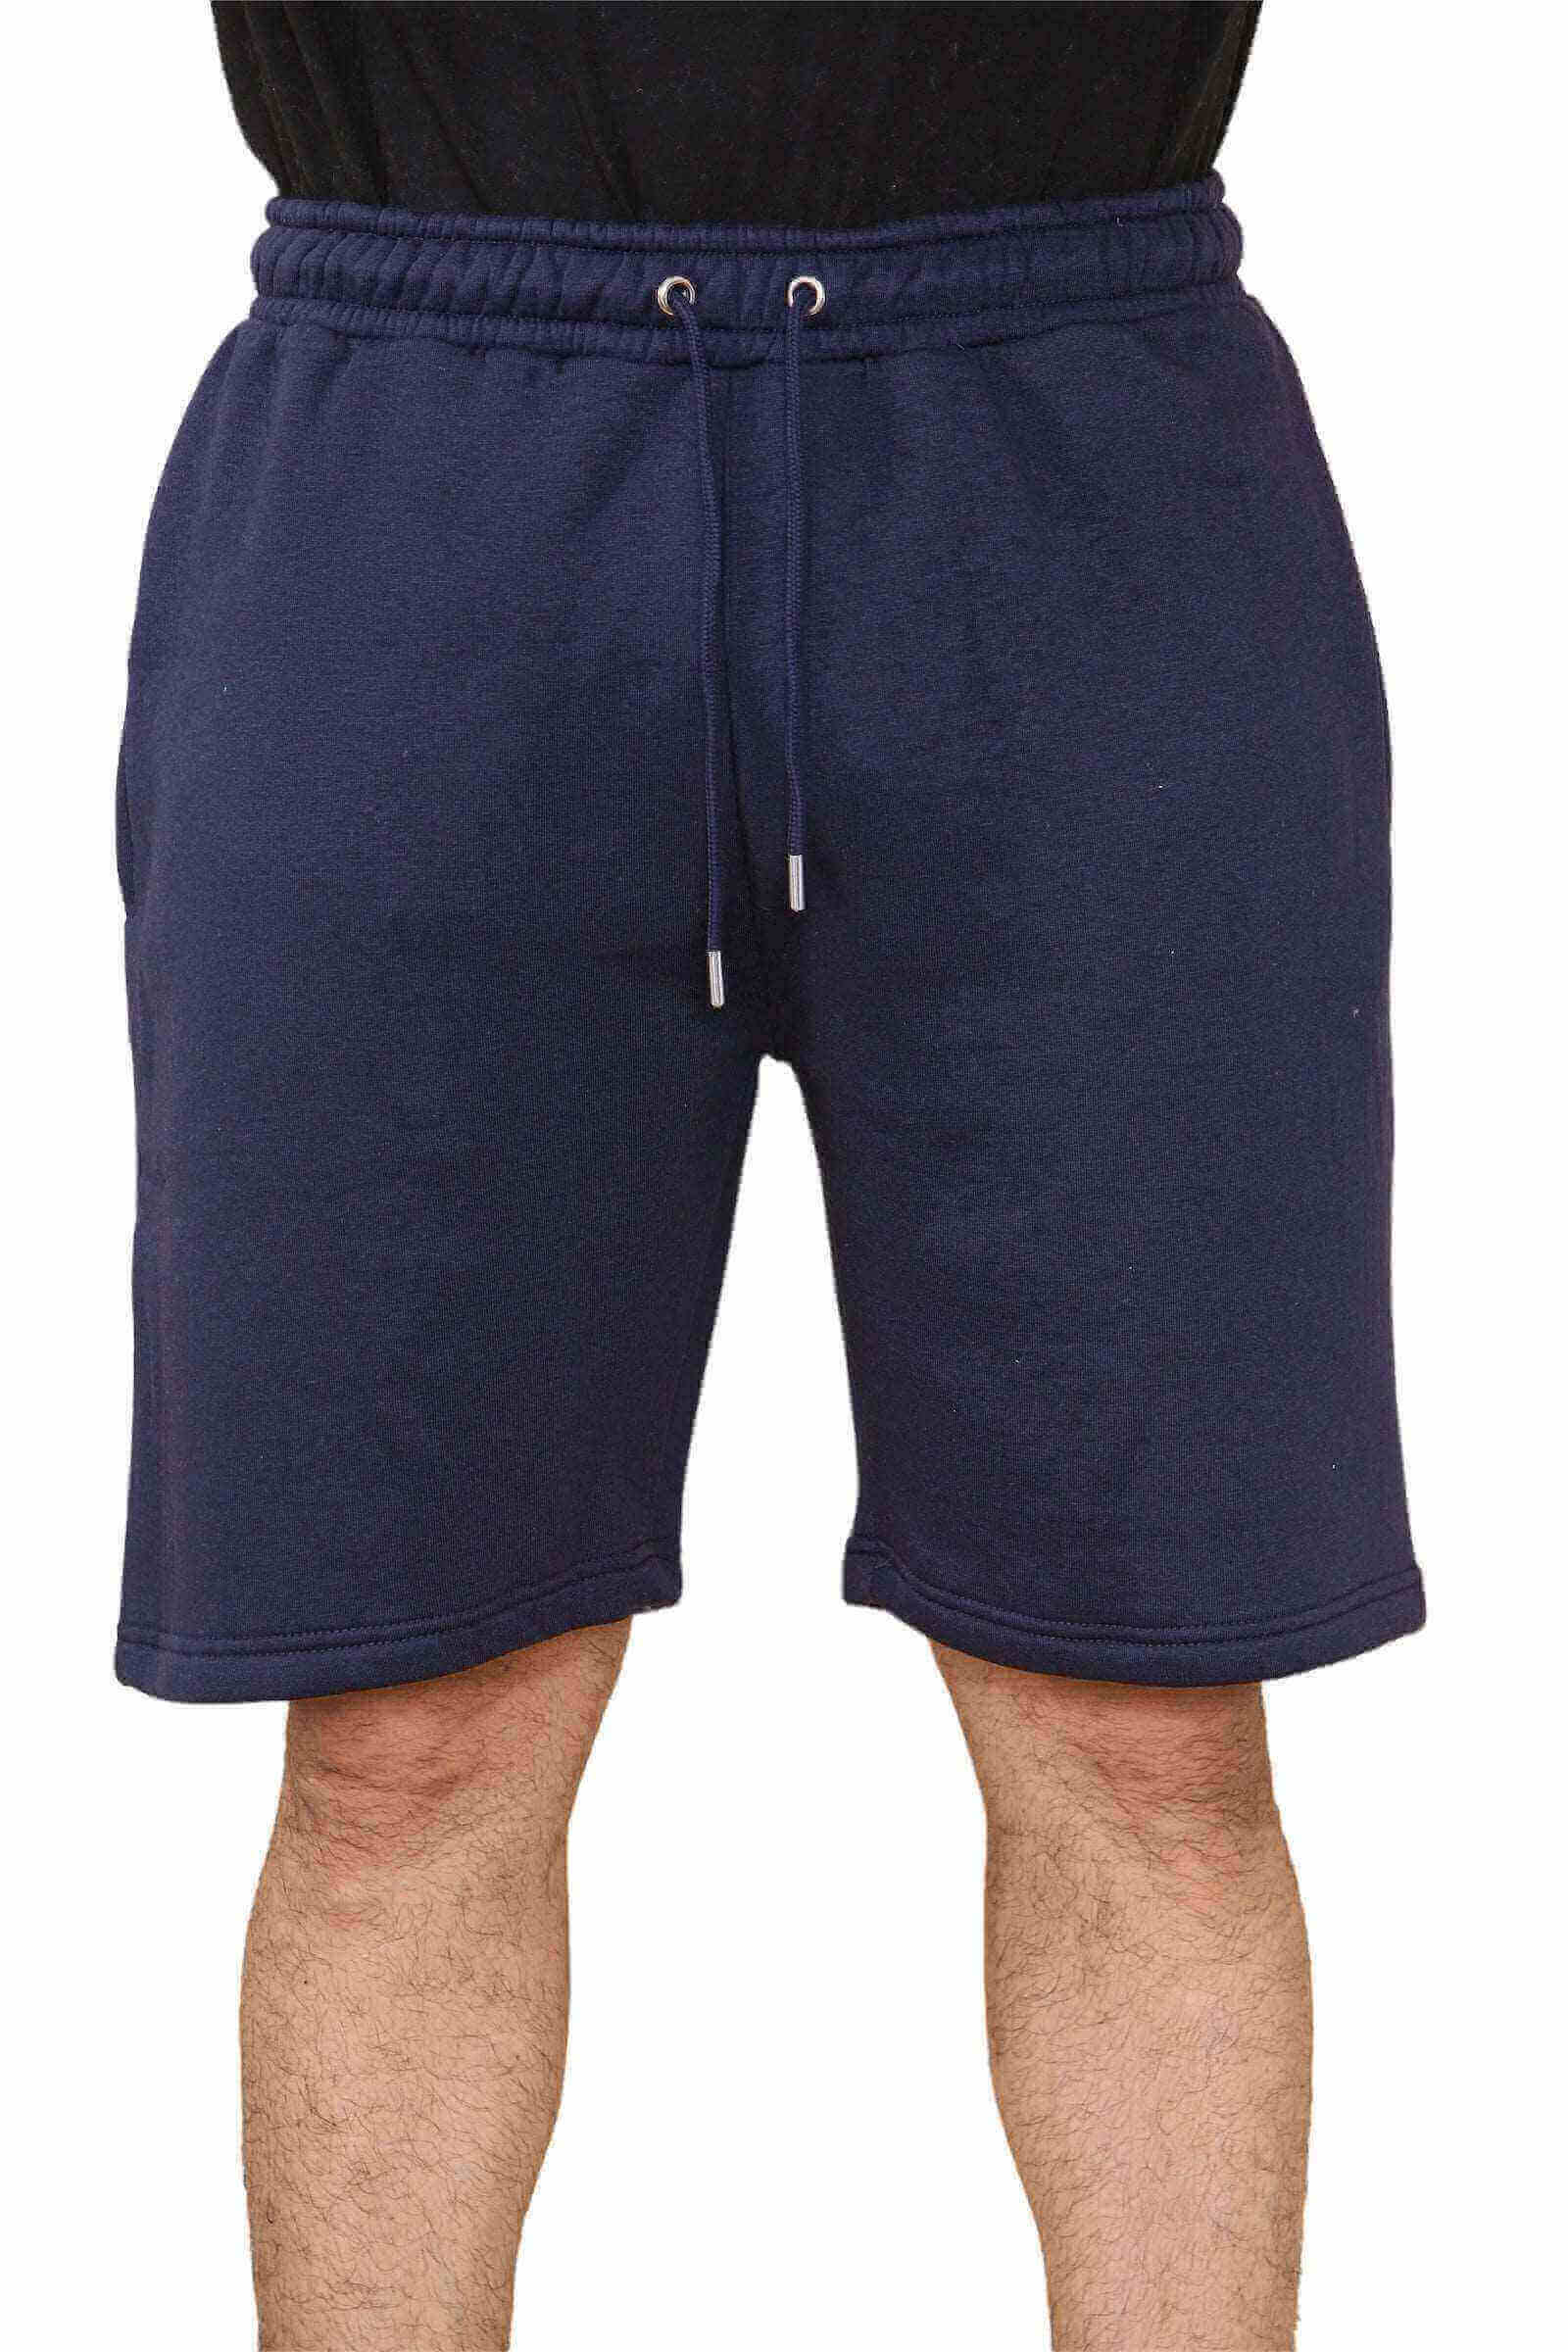 Front View of Men's Gym Shorts in Navy Blue for Your Active Lifestyle